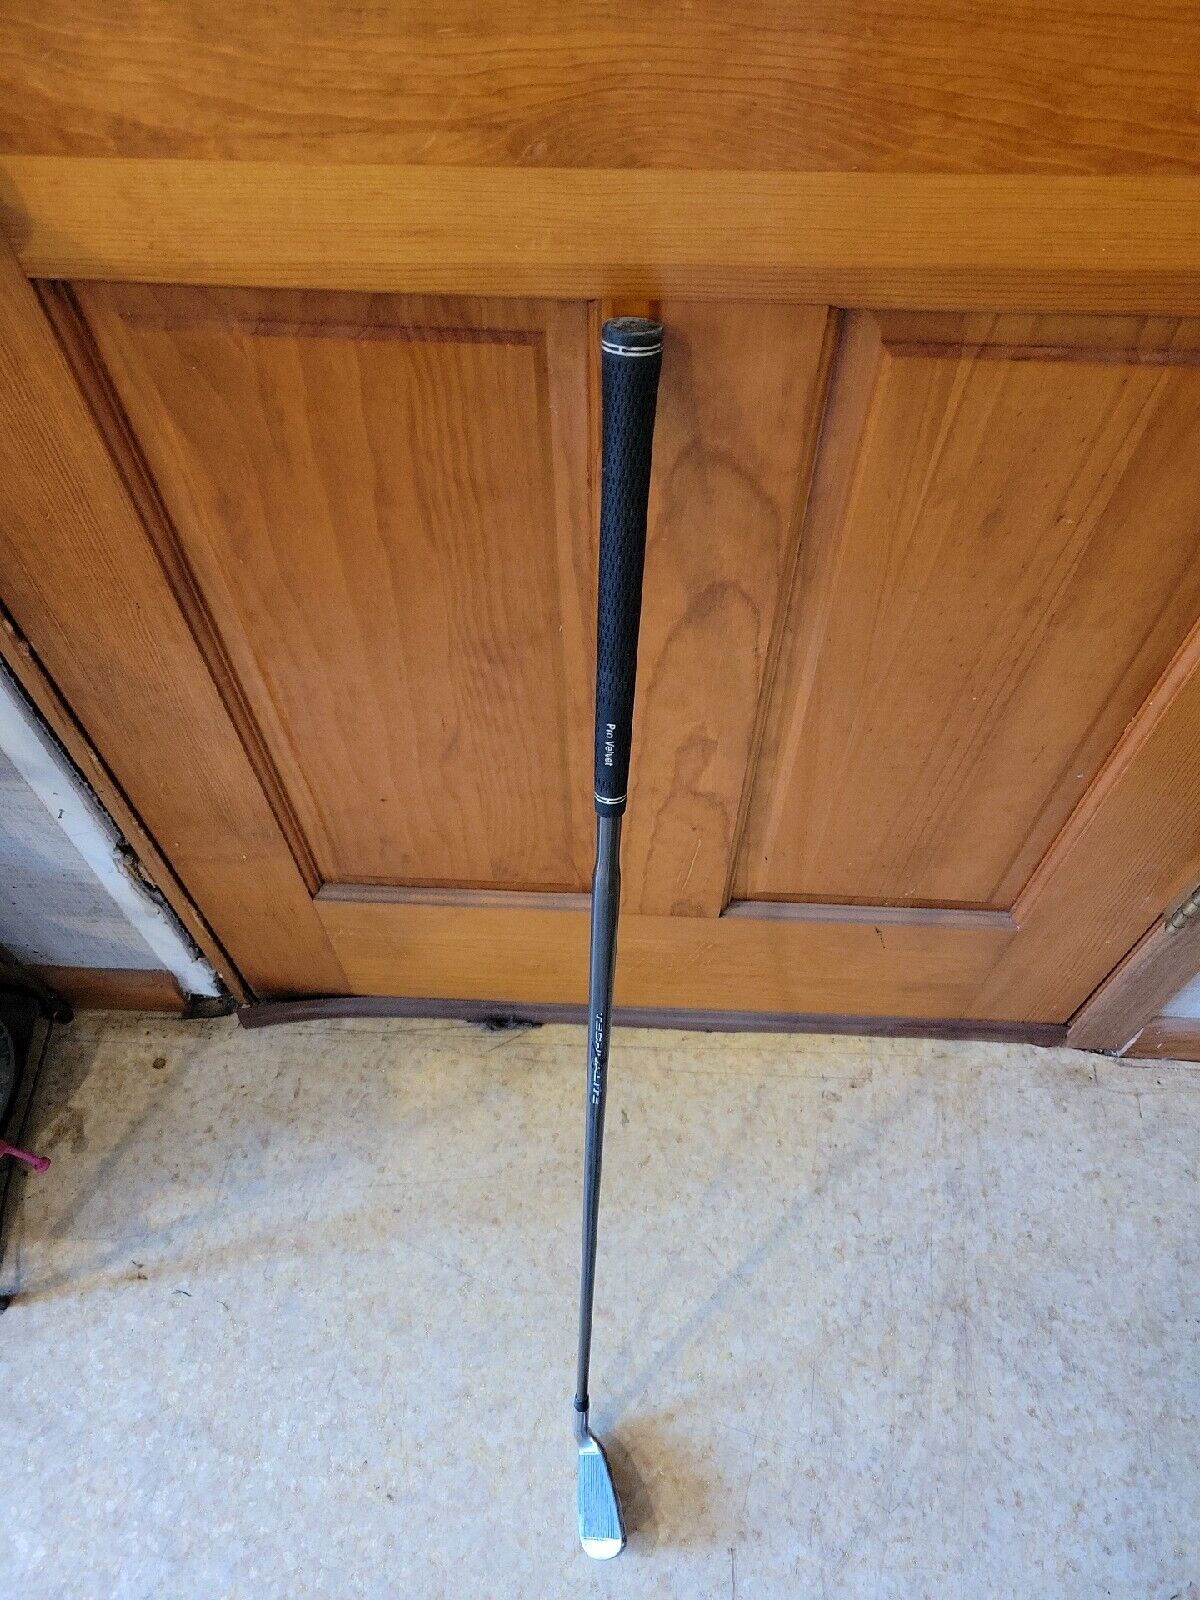 FACTOR PLUS OVERSIZE 7 STAINLESS KNIGHT TECHNALITE LADIES SHAFT GOLF CLUB